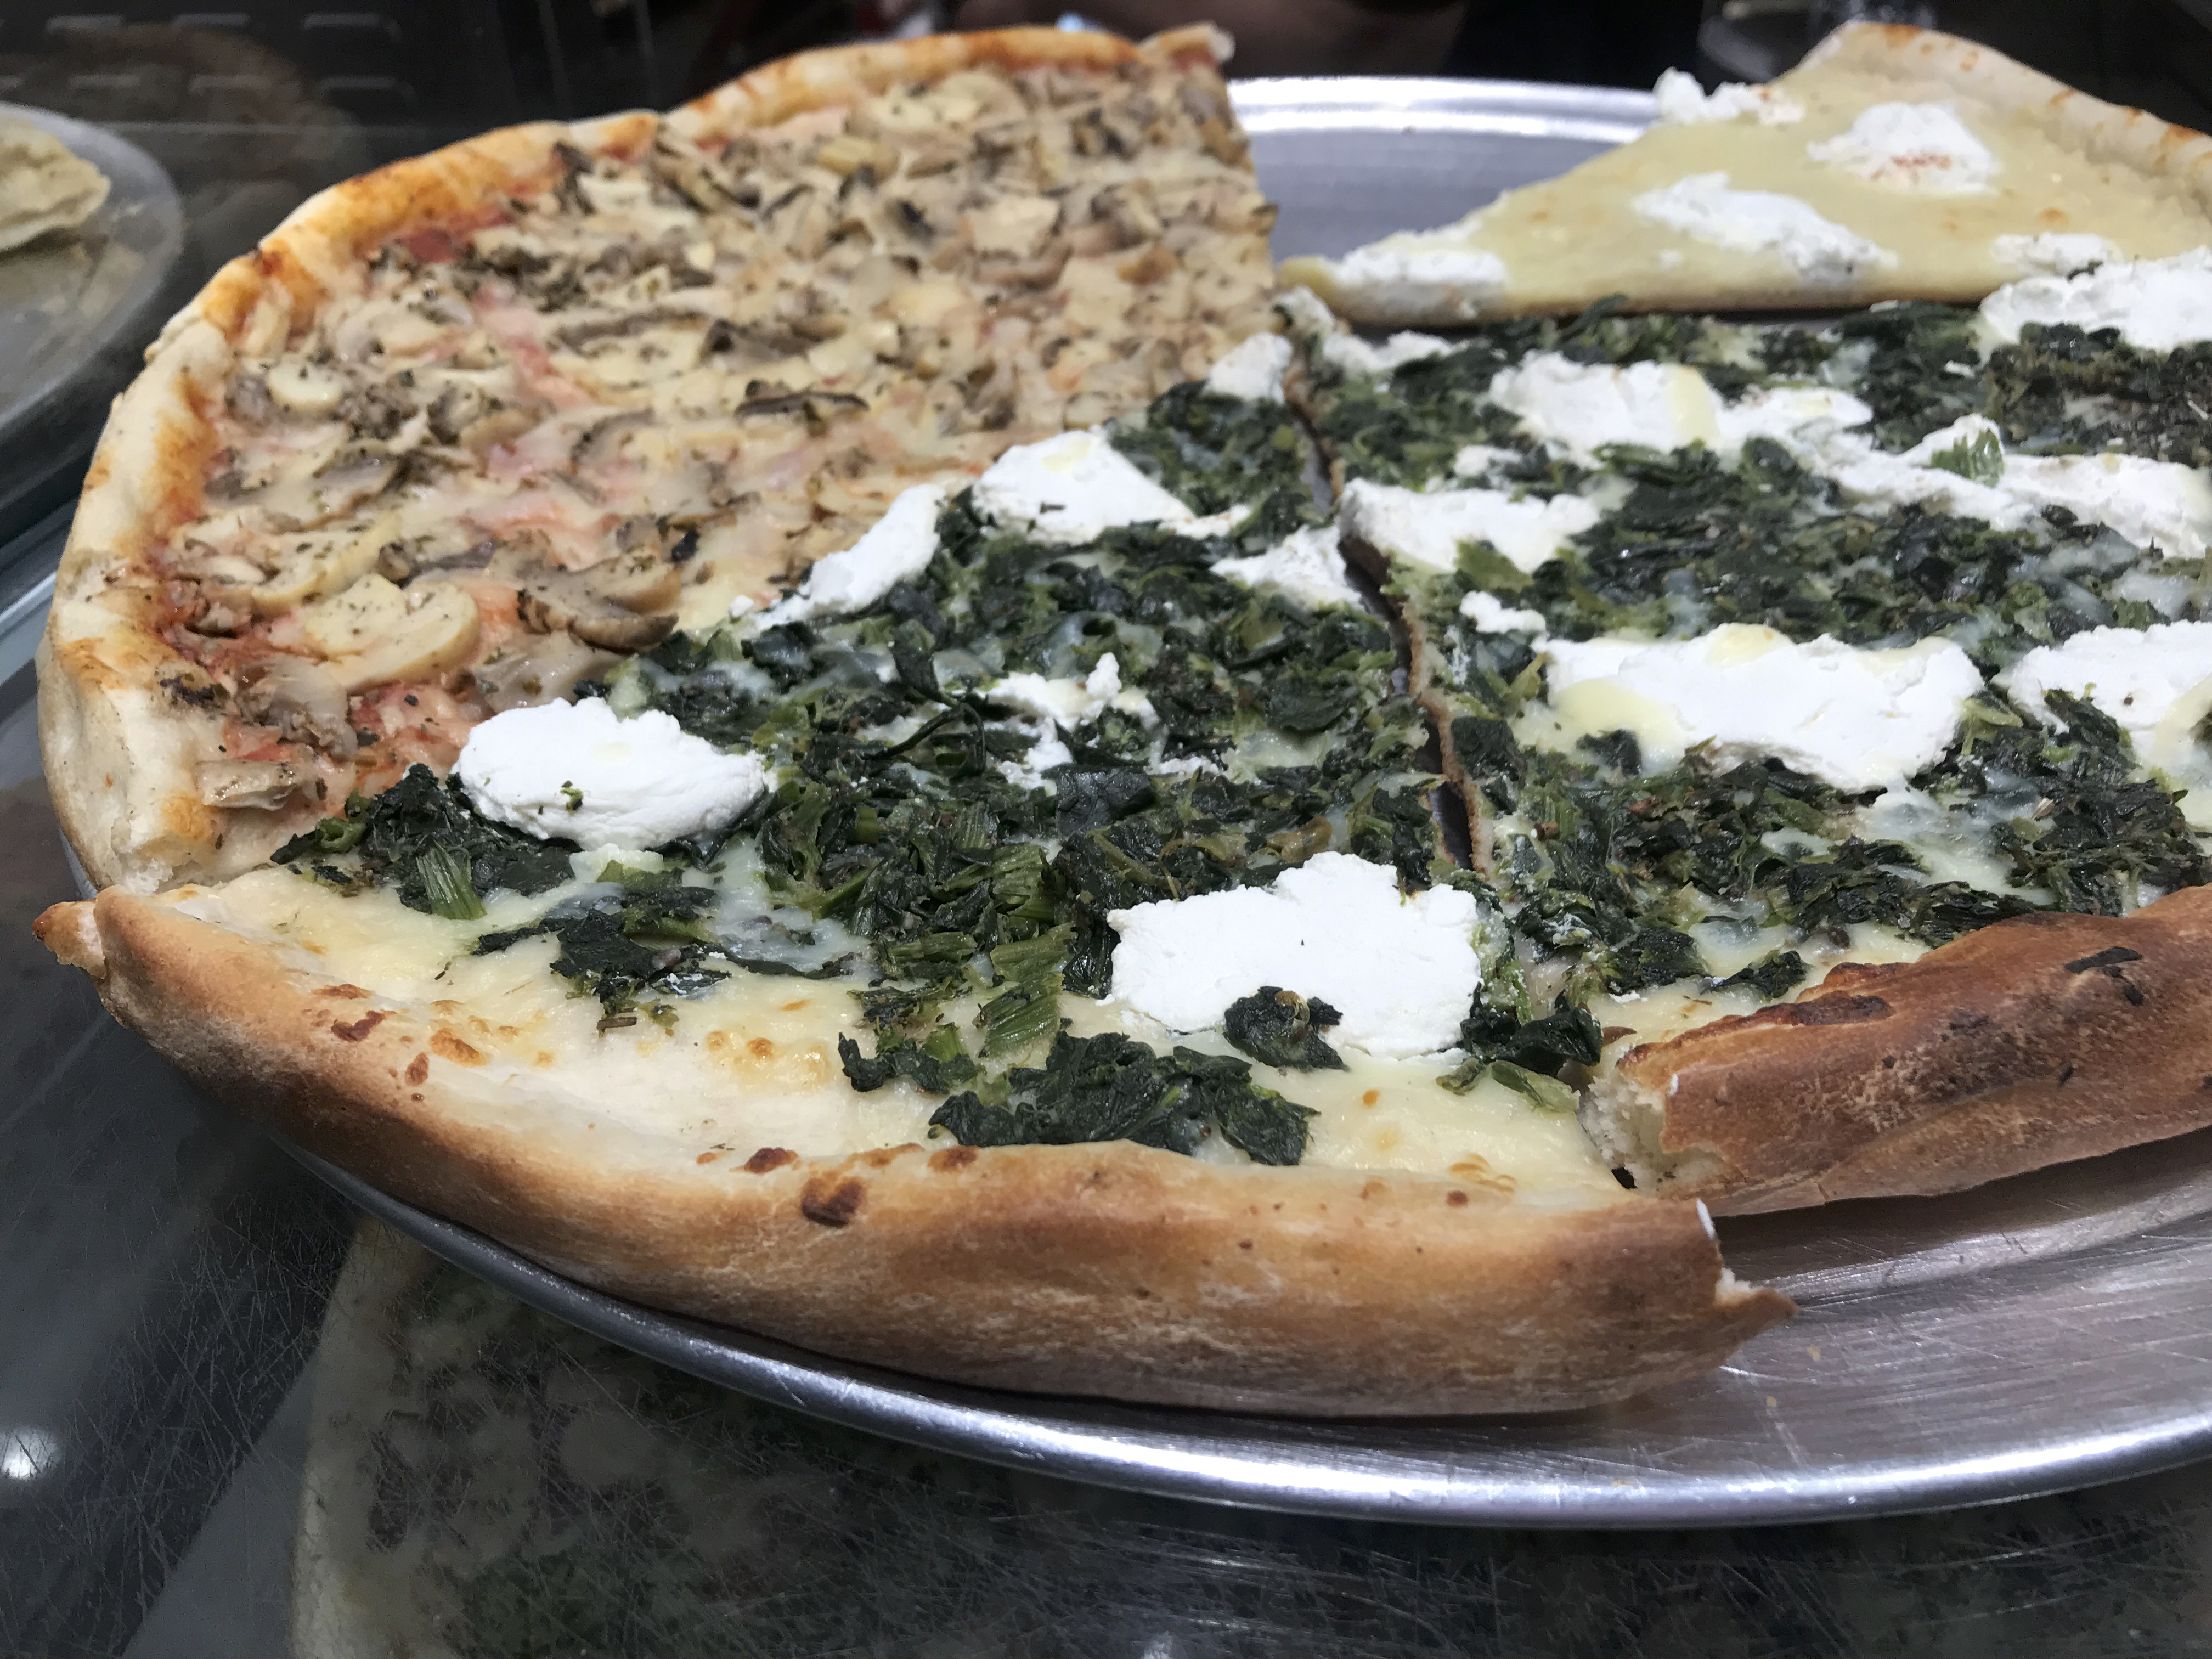 I’d Rather Be Eating a Slice - A photo of slices of ricotta and spinach at 2 Bros. Pizza restaurant in New York City, New York. Photo Courtesy of FoodWaterShoes